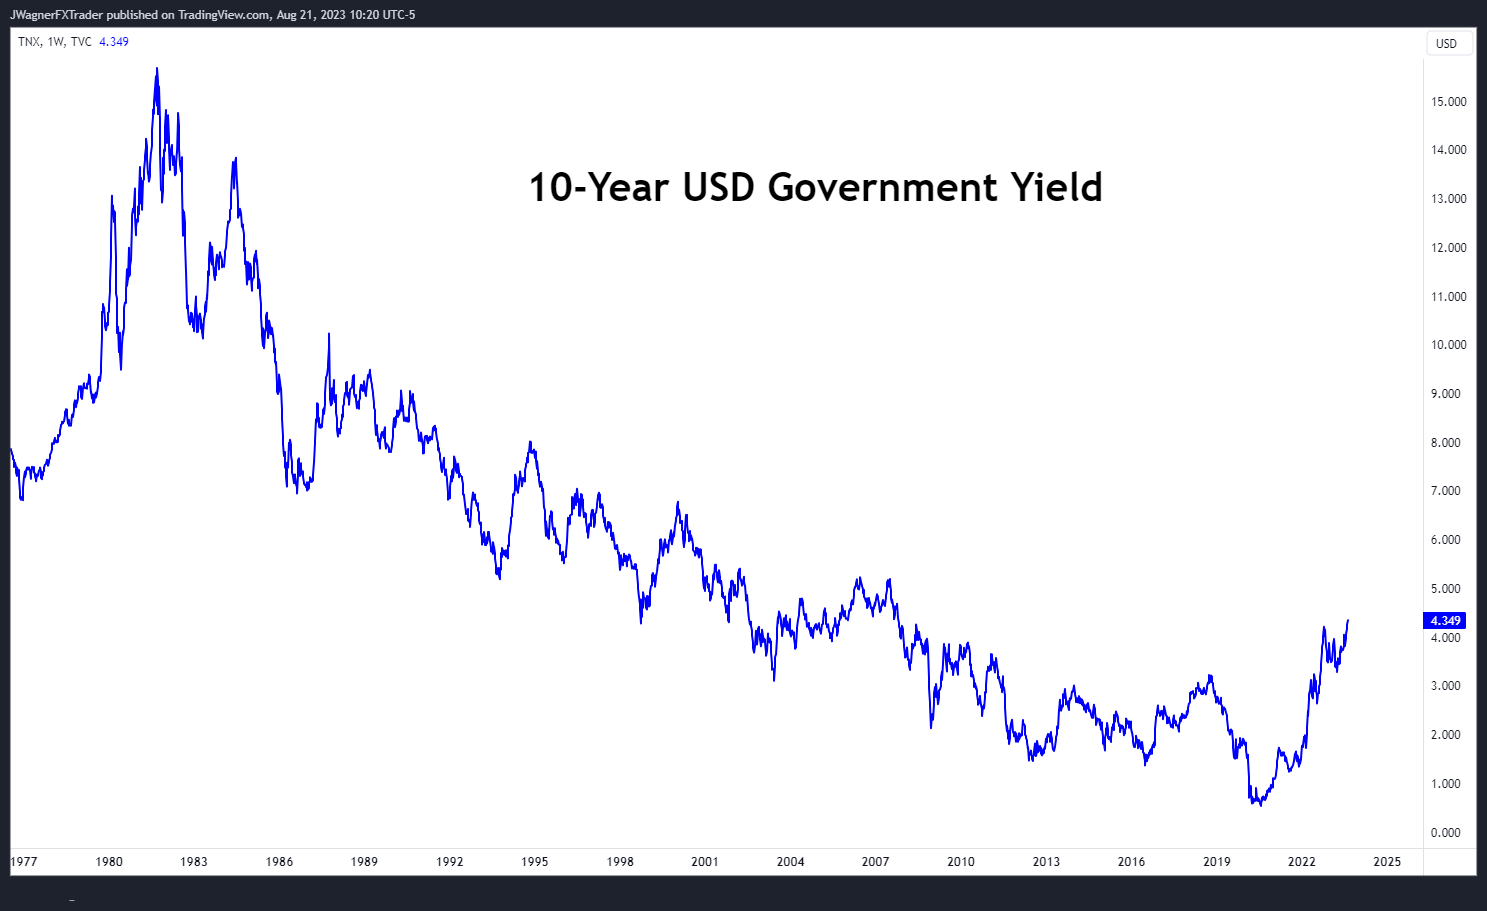 10-Year USD Government Yield from 1977 to 2023